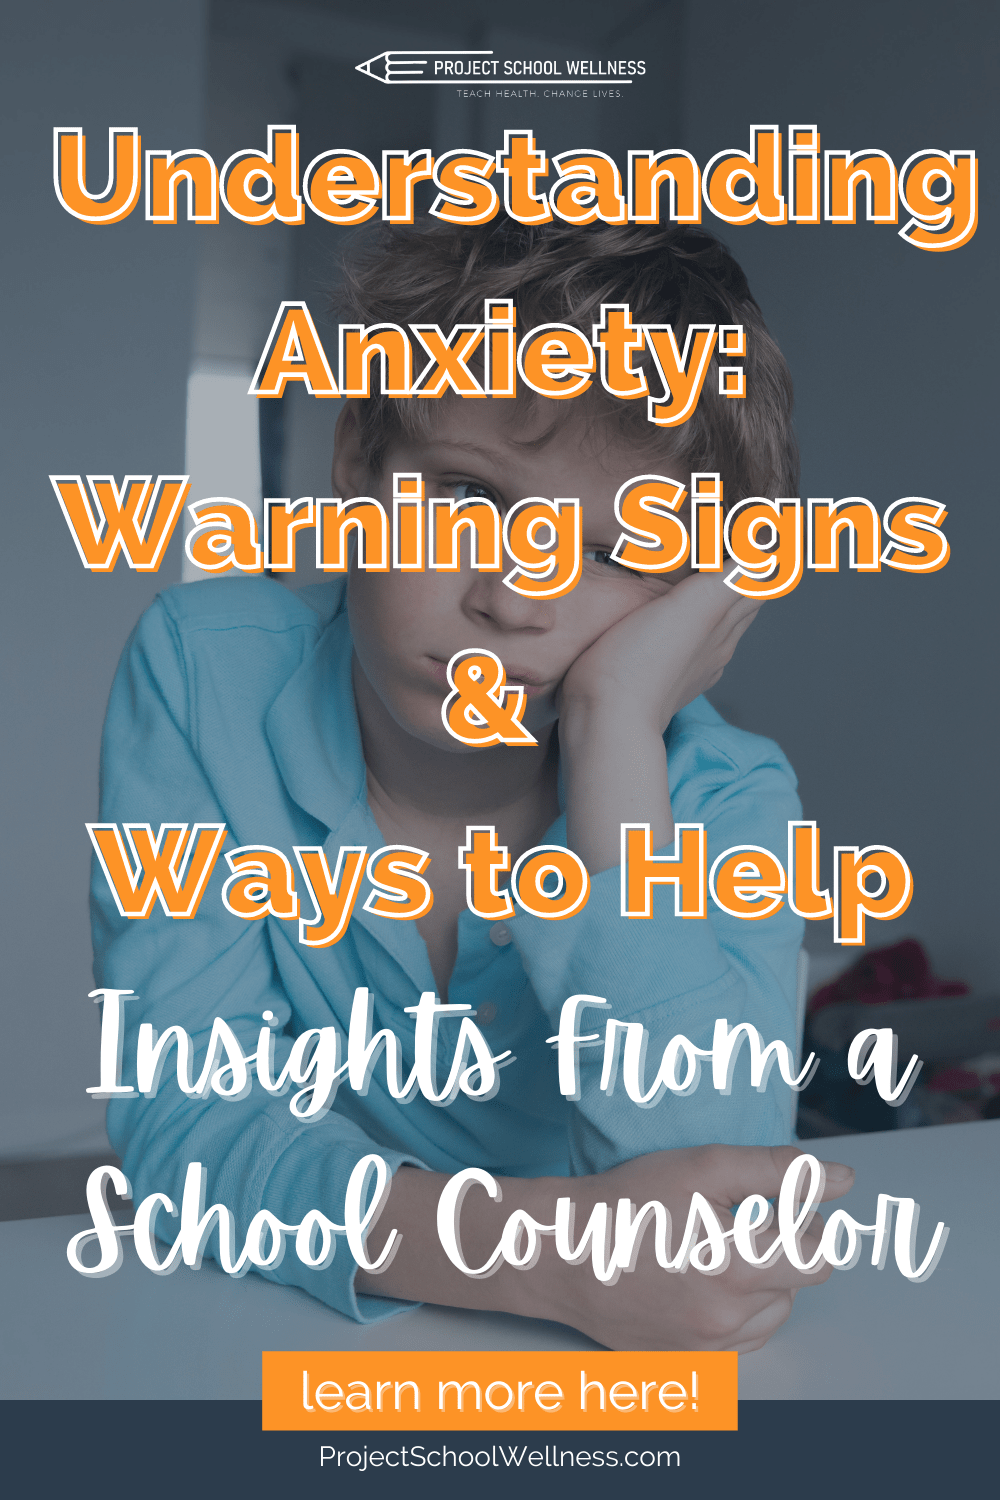 Understanding Anxiety_ Warning Signs _ Ways to Help - a Project School Wellness blog